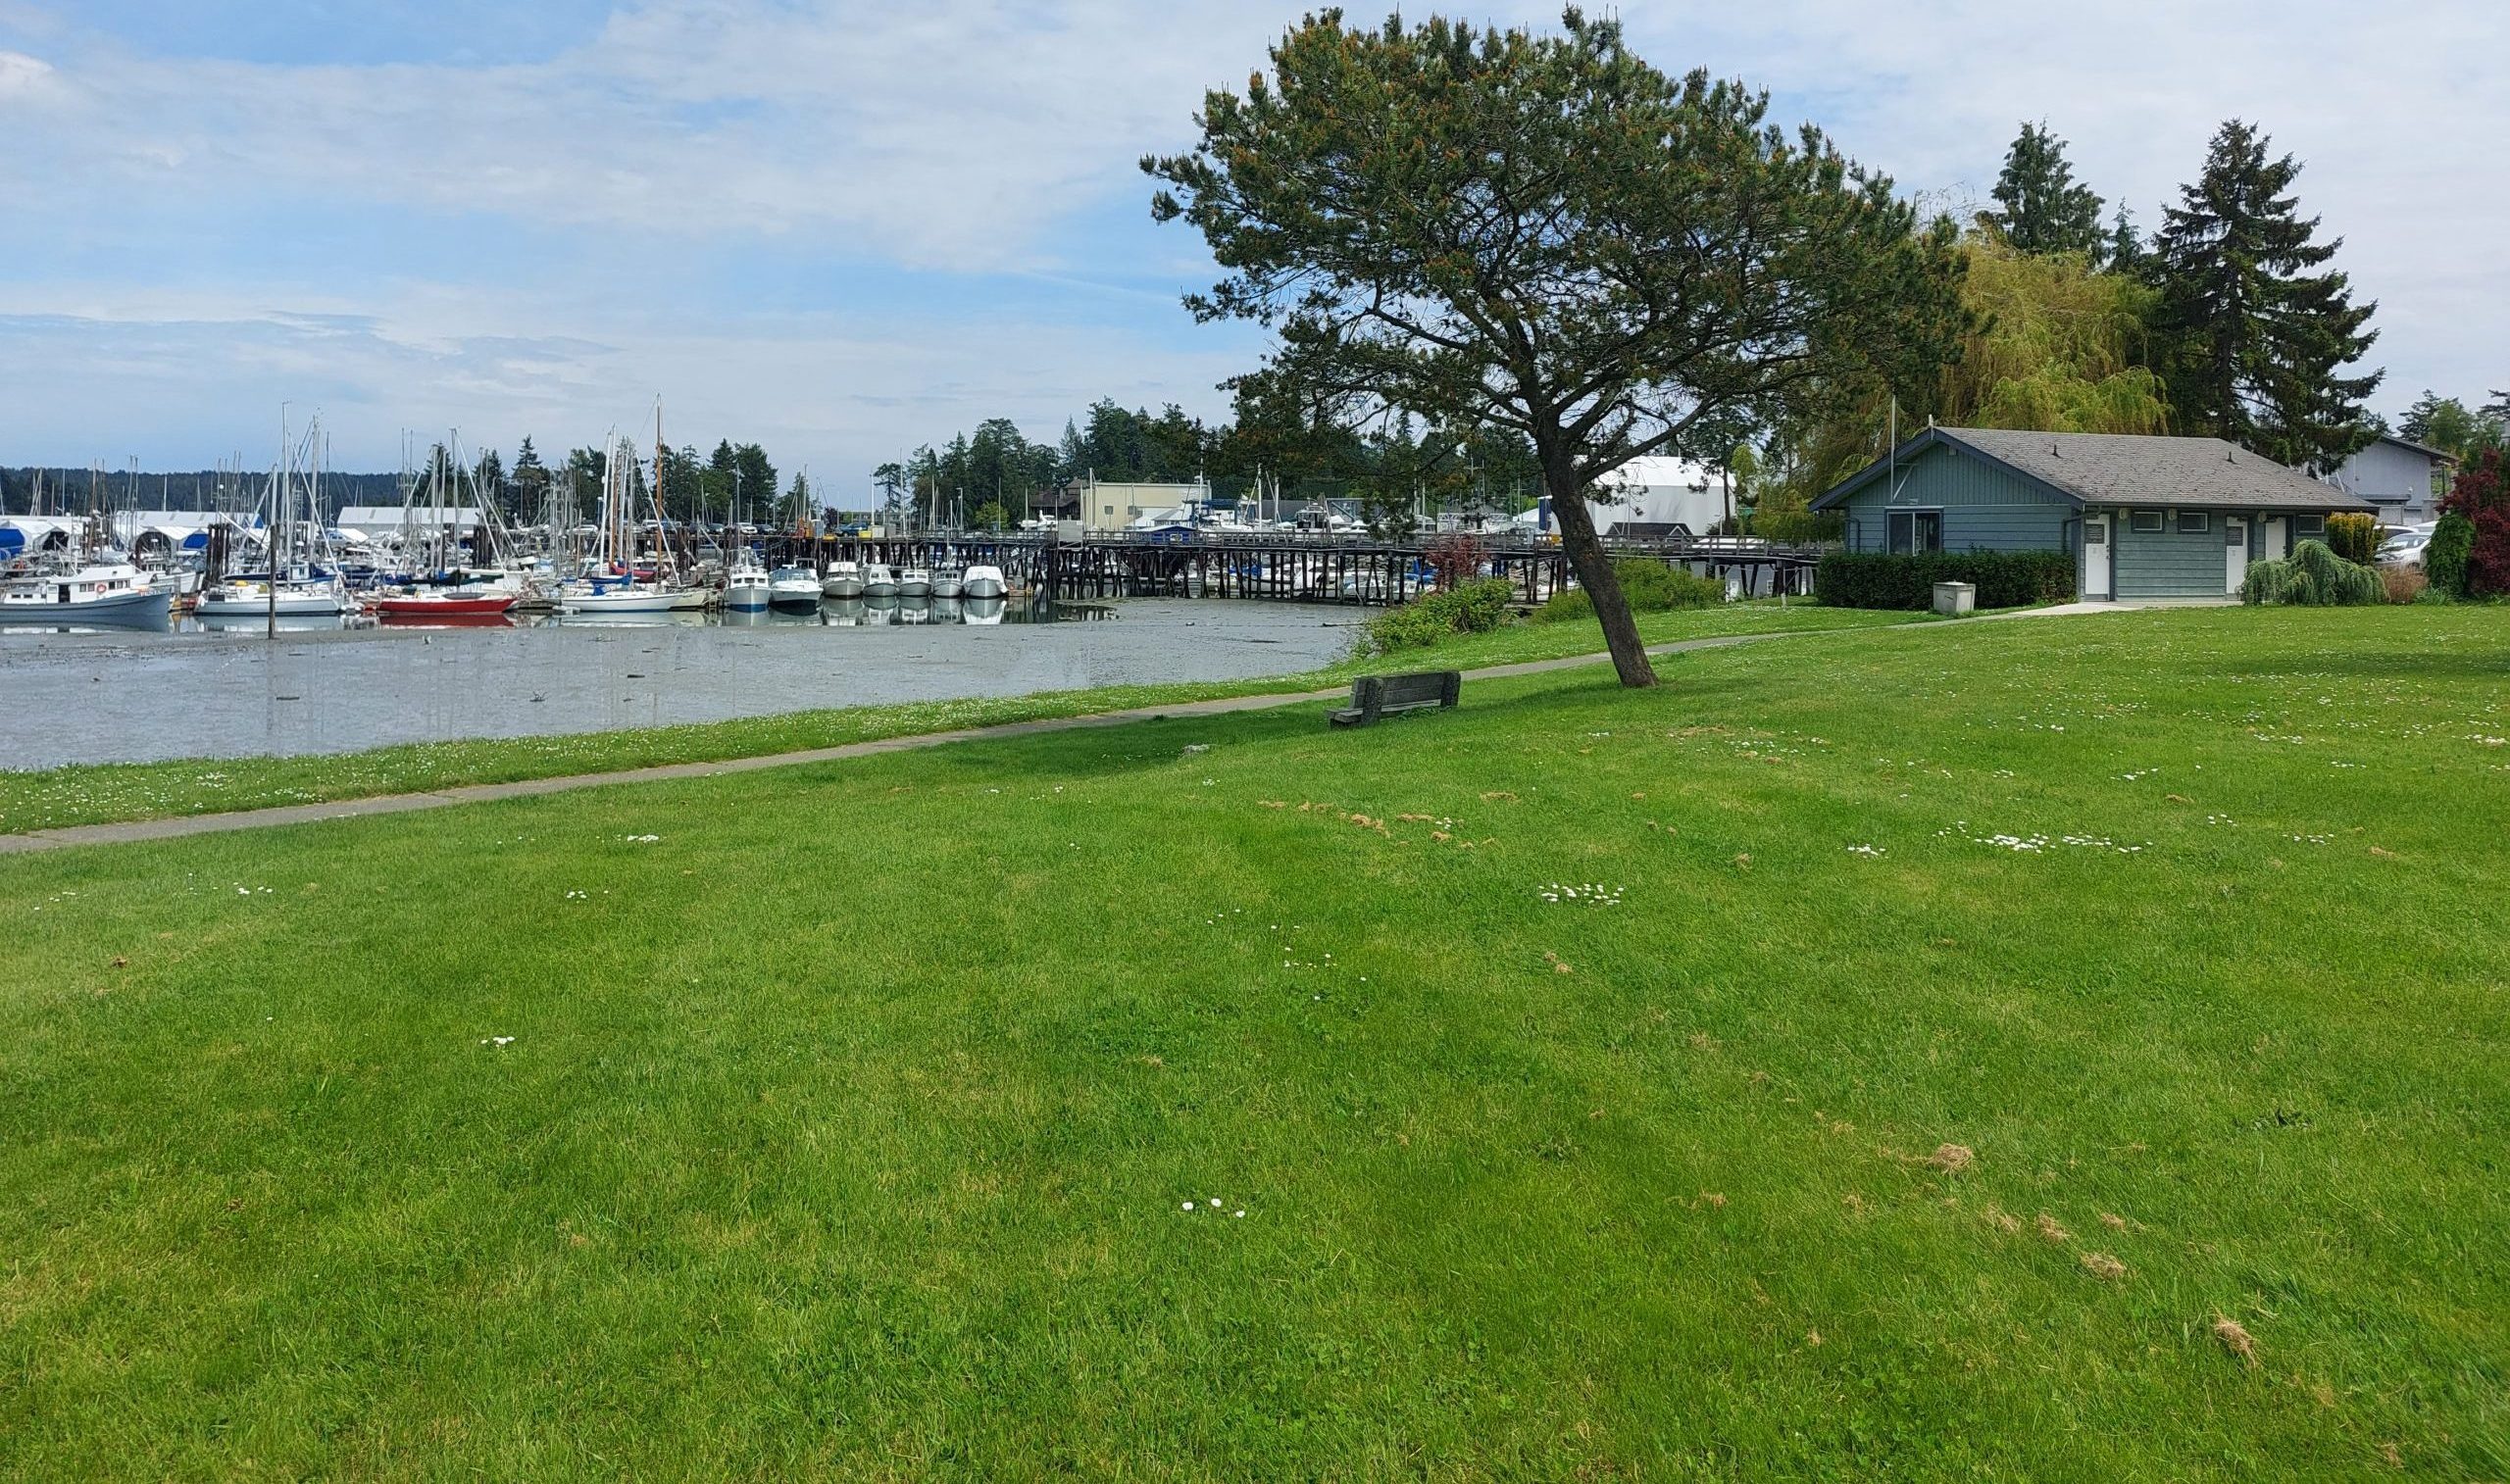 Resthaven Park. Tree on grass overlooking ocean and marina.